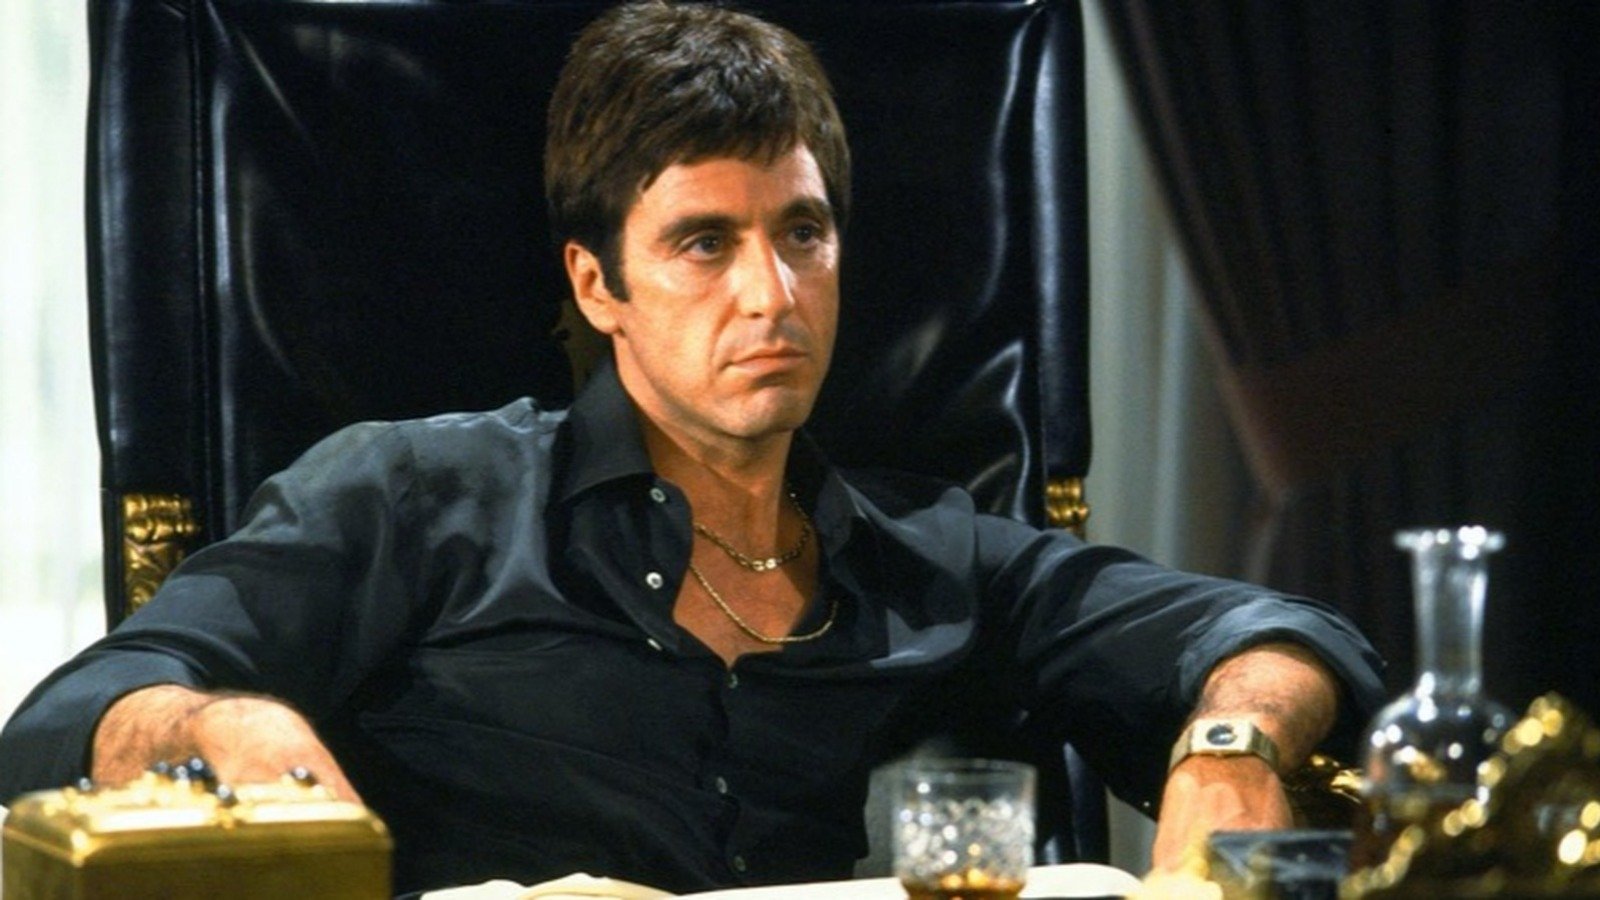 The Antonio Detail You Missed In Scarface